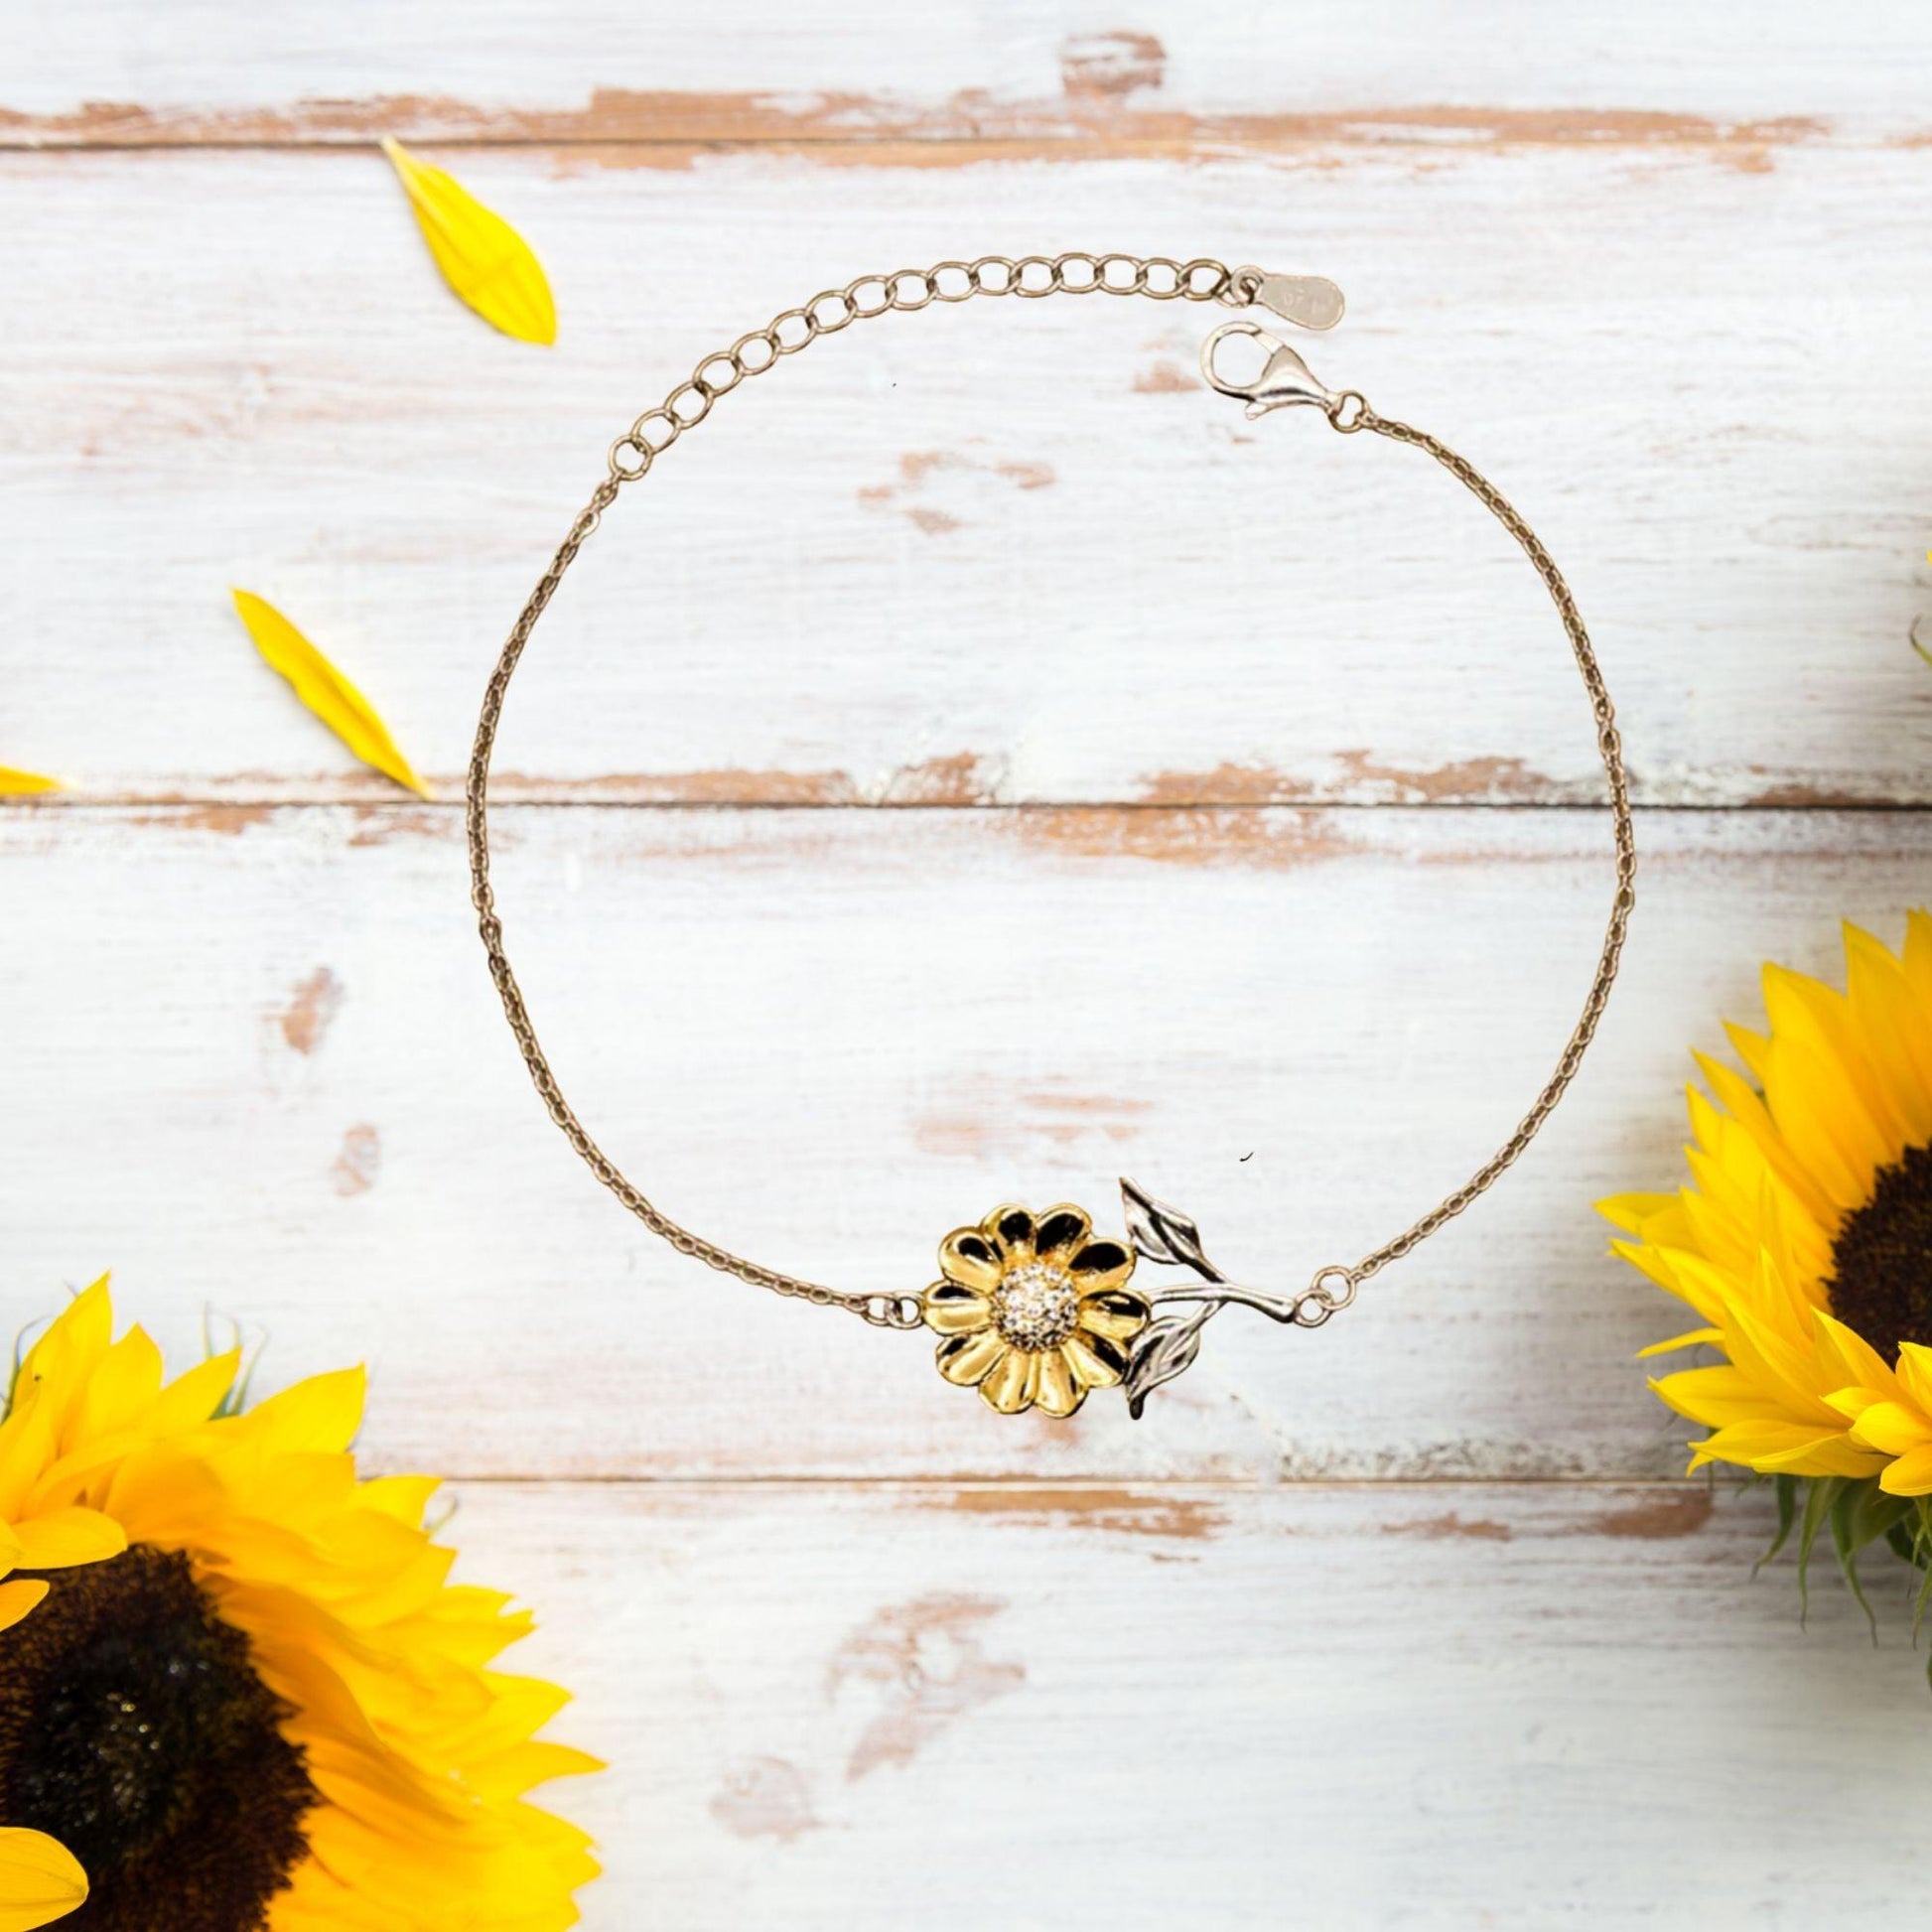 Postal Worker Sunflower Bracelet - Thanks for being who you are - Birthday Christmas Jewelry Gifts Coworkers Colleague Boss - Mallard Moon Gift Shop